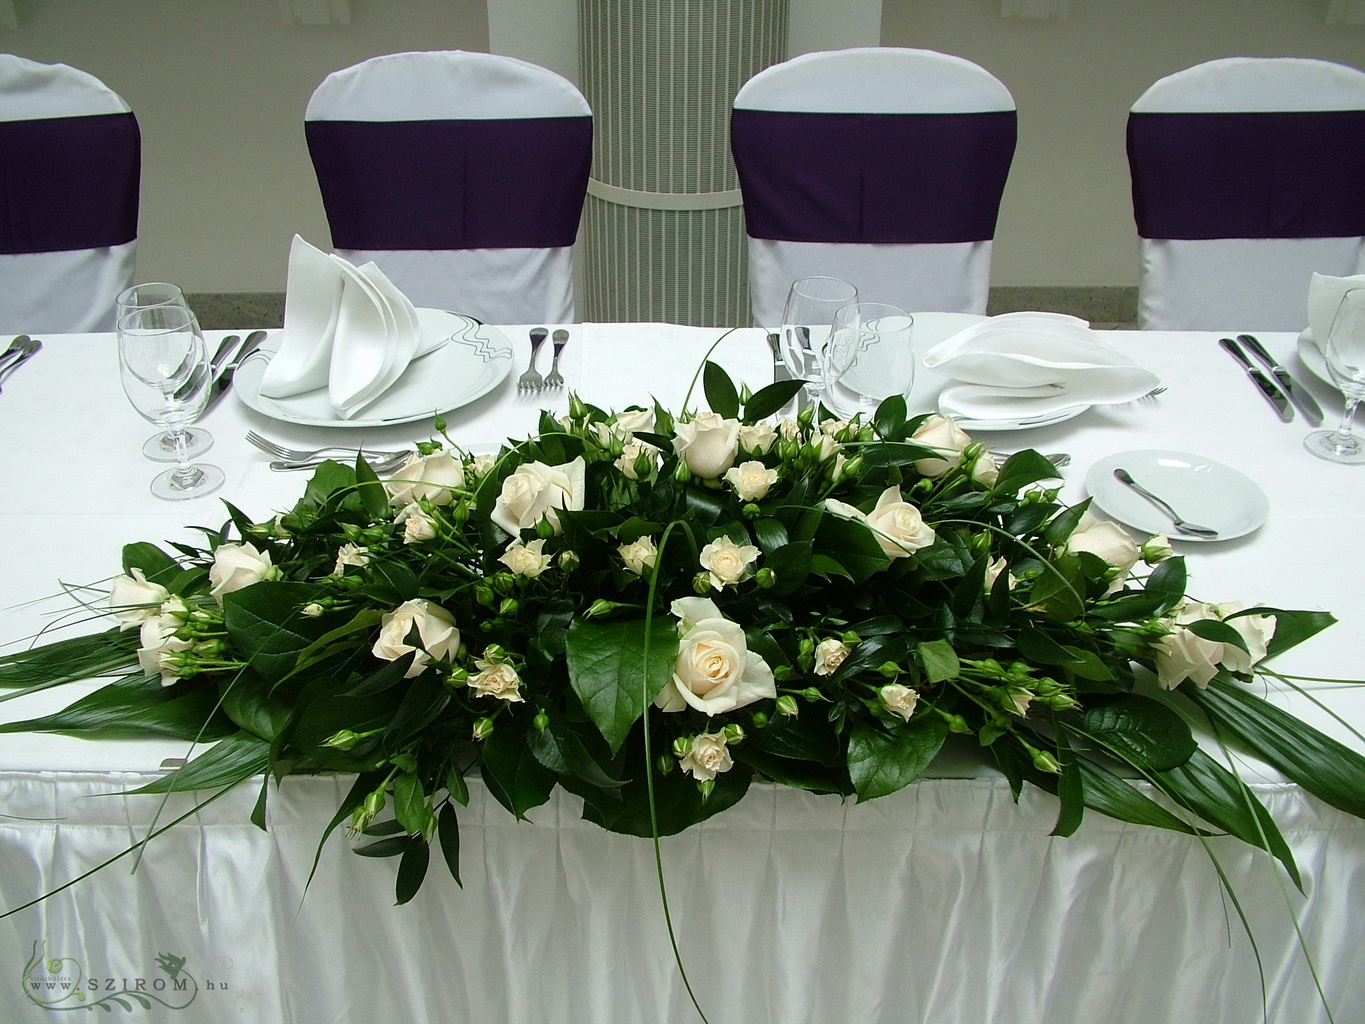 flower delivery Budapest - Main table centerpiece (roses, spray roses), Gerbeaud Budapest, wedding